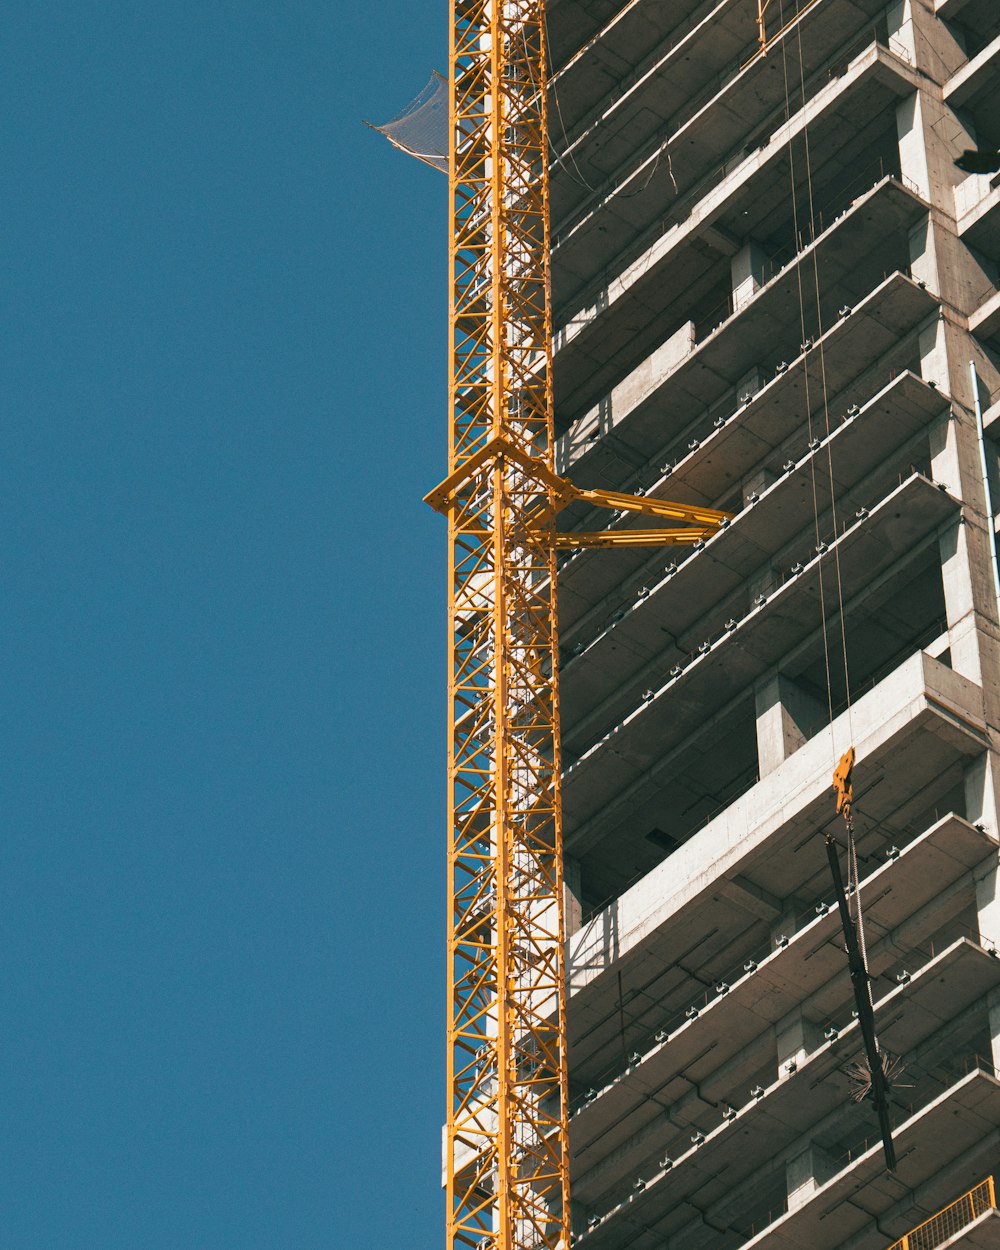 a crane is attached to the side of a tall building